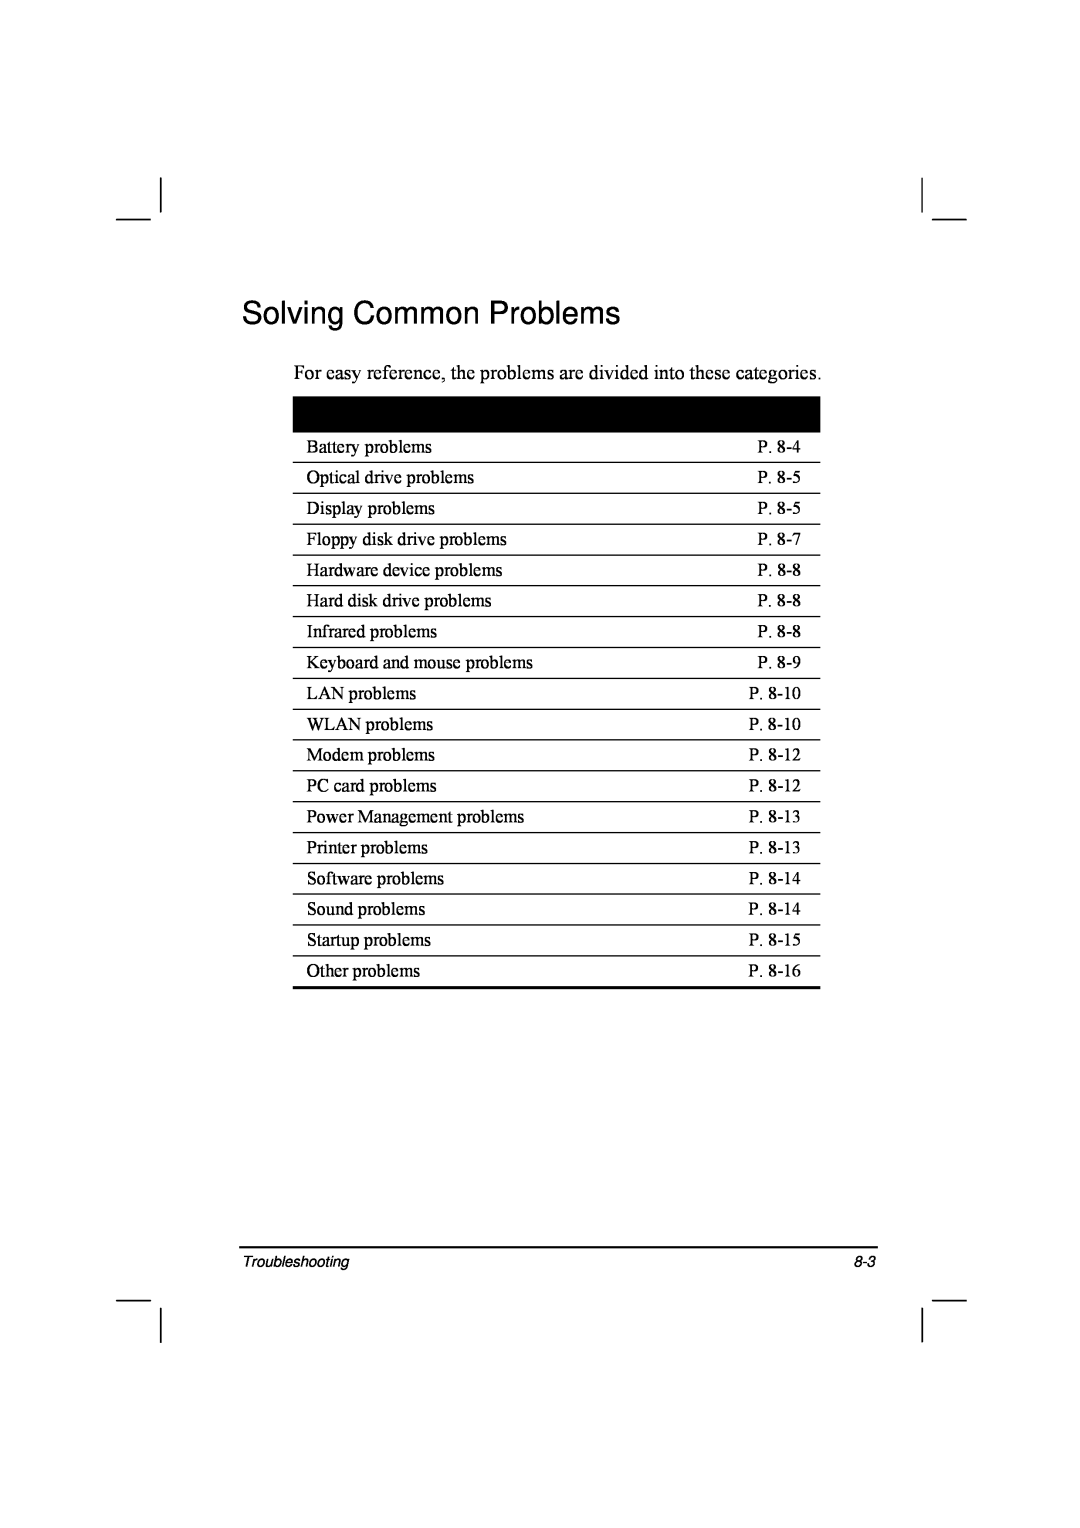 TAG 20 Series Solving Common Problems, For easy reference, the problems are divided into these categories, Problem Type 